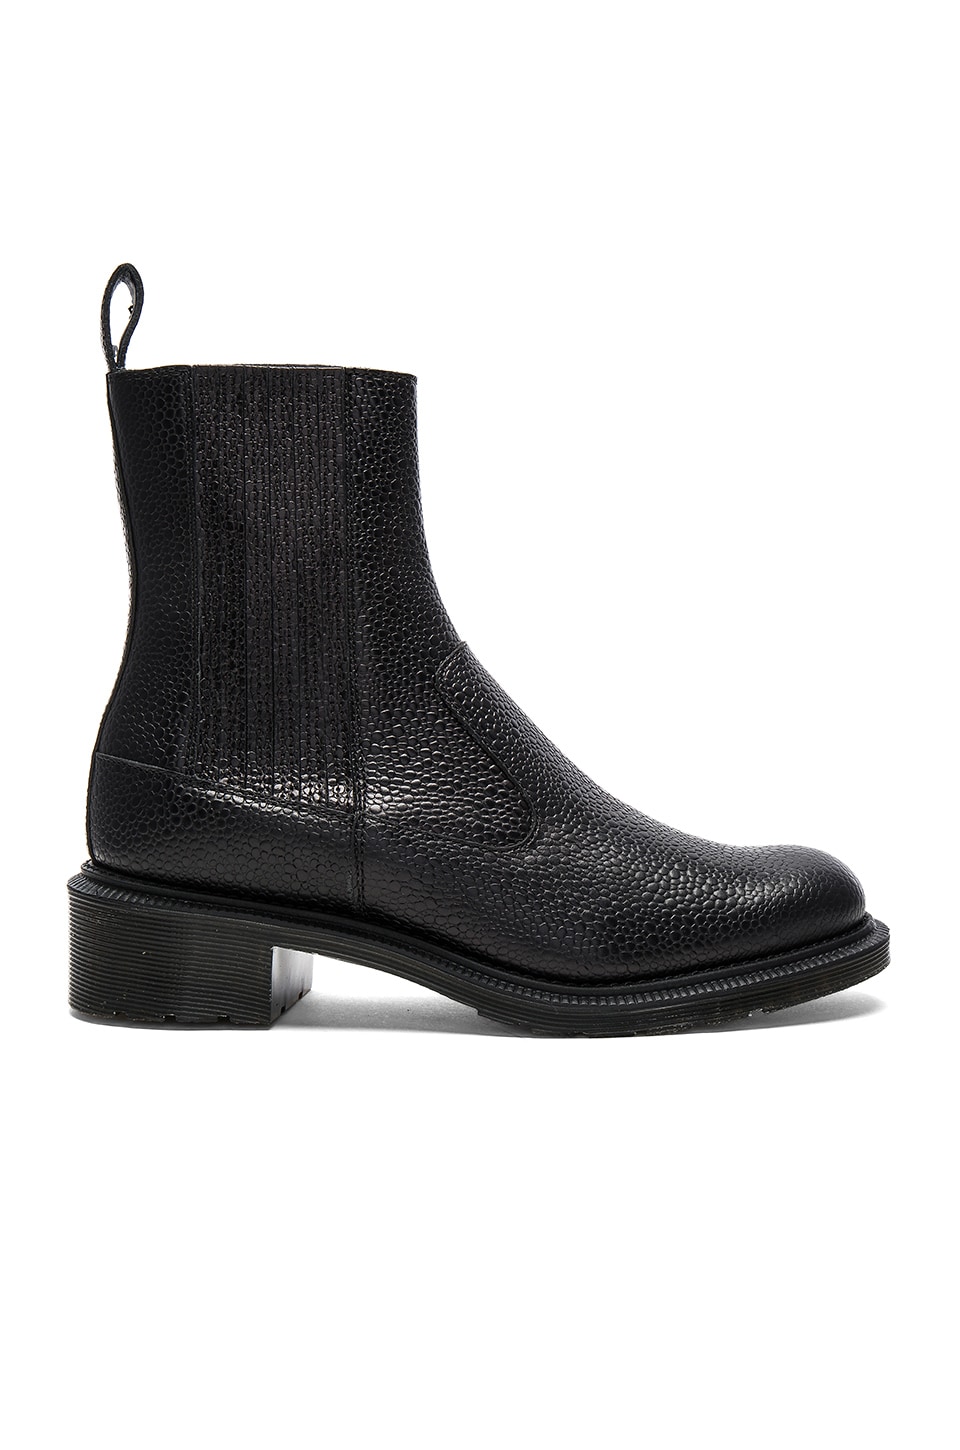 2 Stores In Stock: DR. MARTENS Eleanore Chelsea Boot, Black | ModeSens